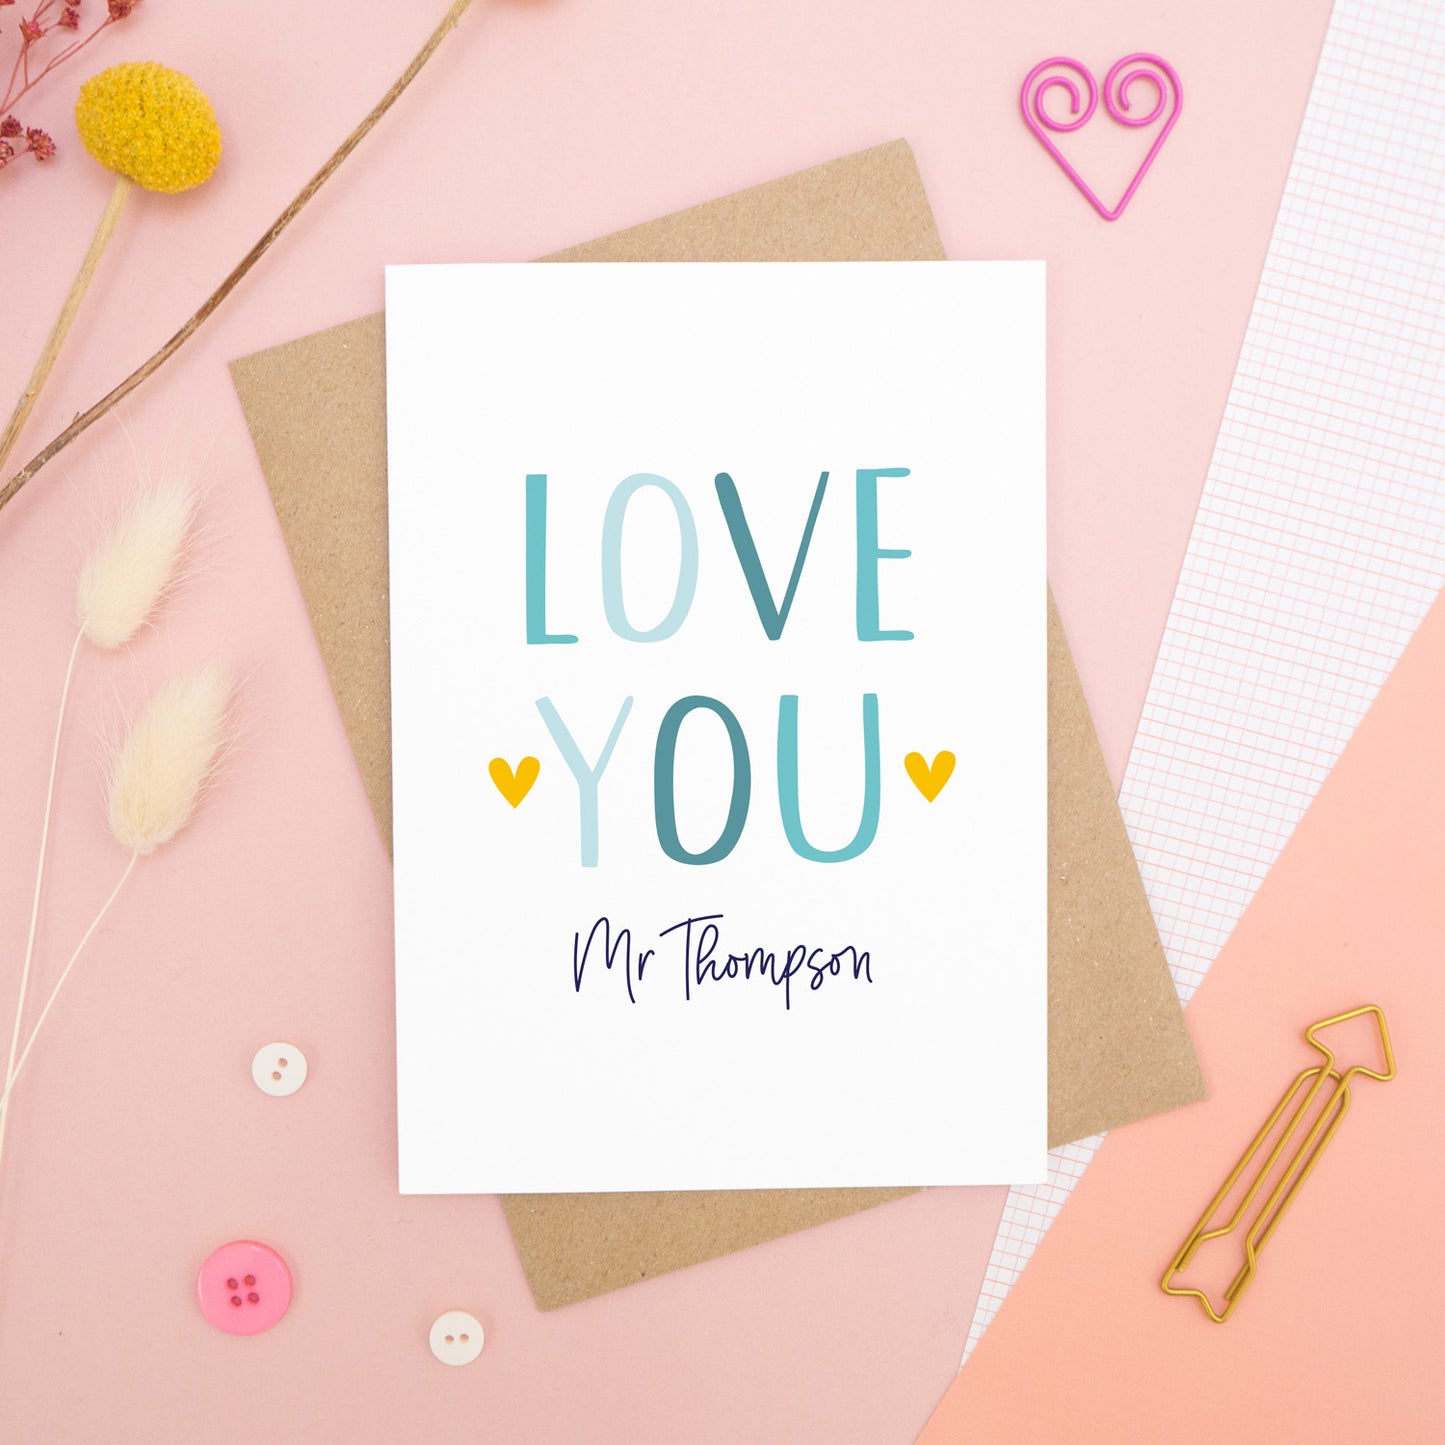 A personalised love you card photographed on a pink background with floral props, paper clips, and buttons. This image shows the ‘love you’ anniversary card in the blue colour way. The personalisation is navy and there are pops of yellow in the hearts.